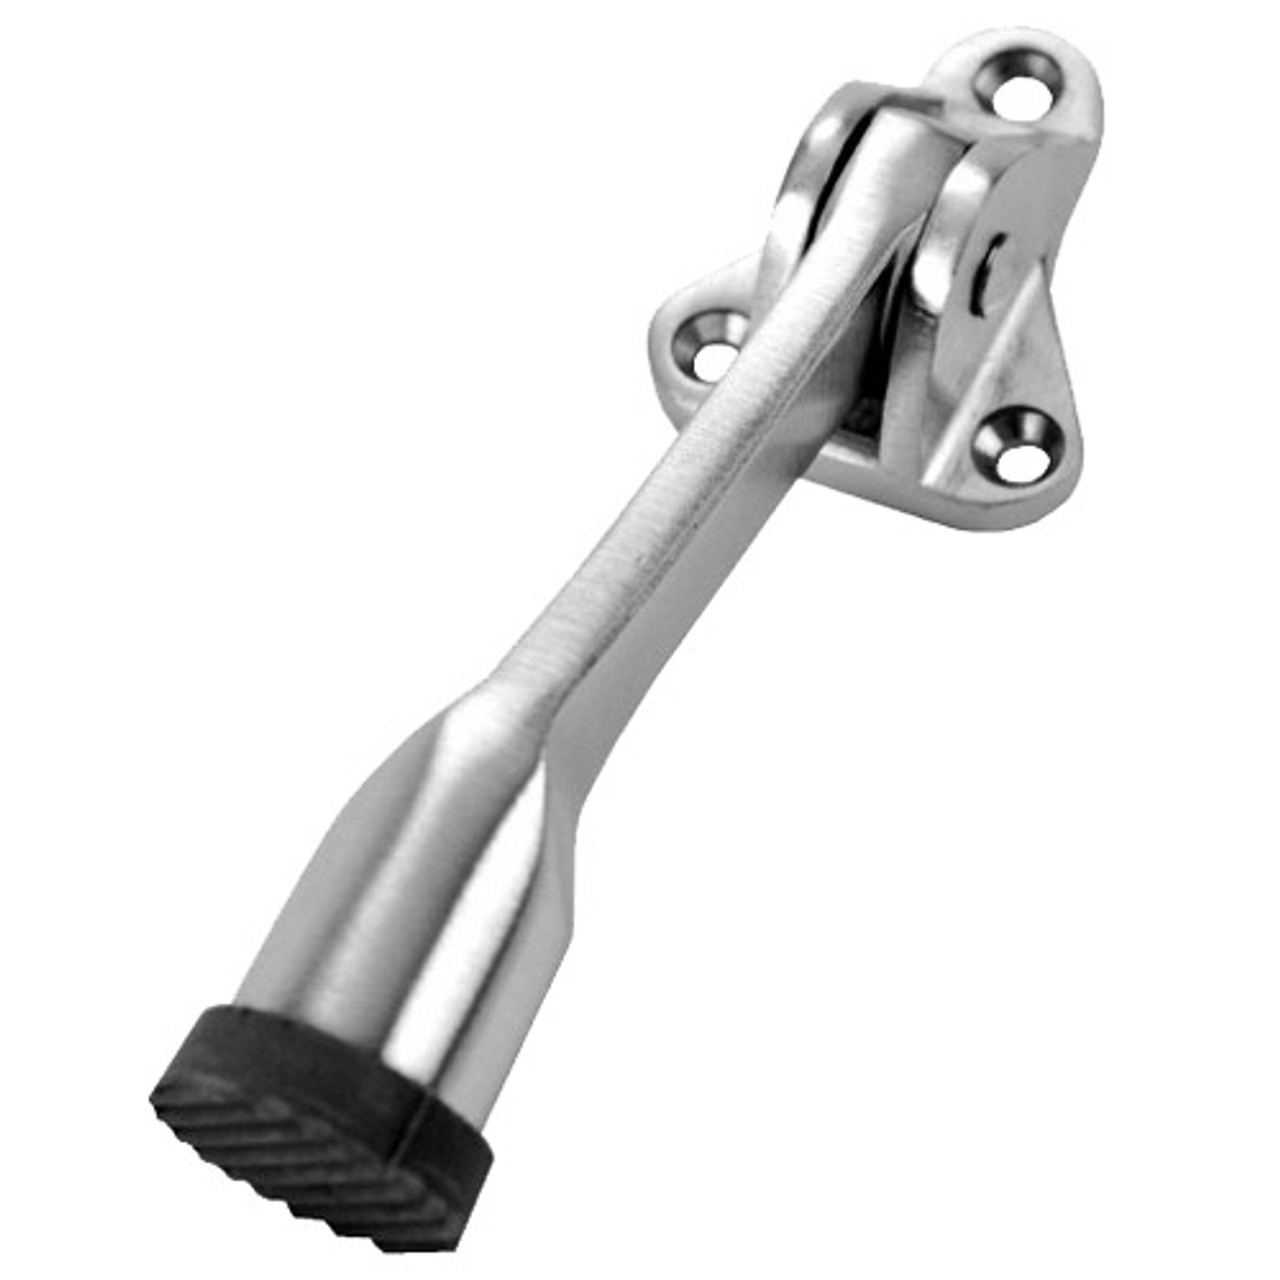 1455-CP Don Jo Door Holder in Chrome Plated Finish